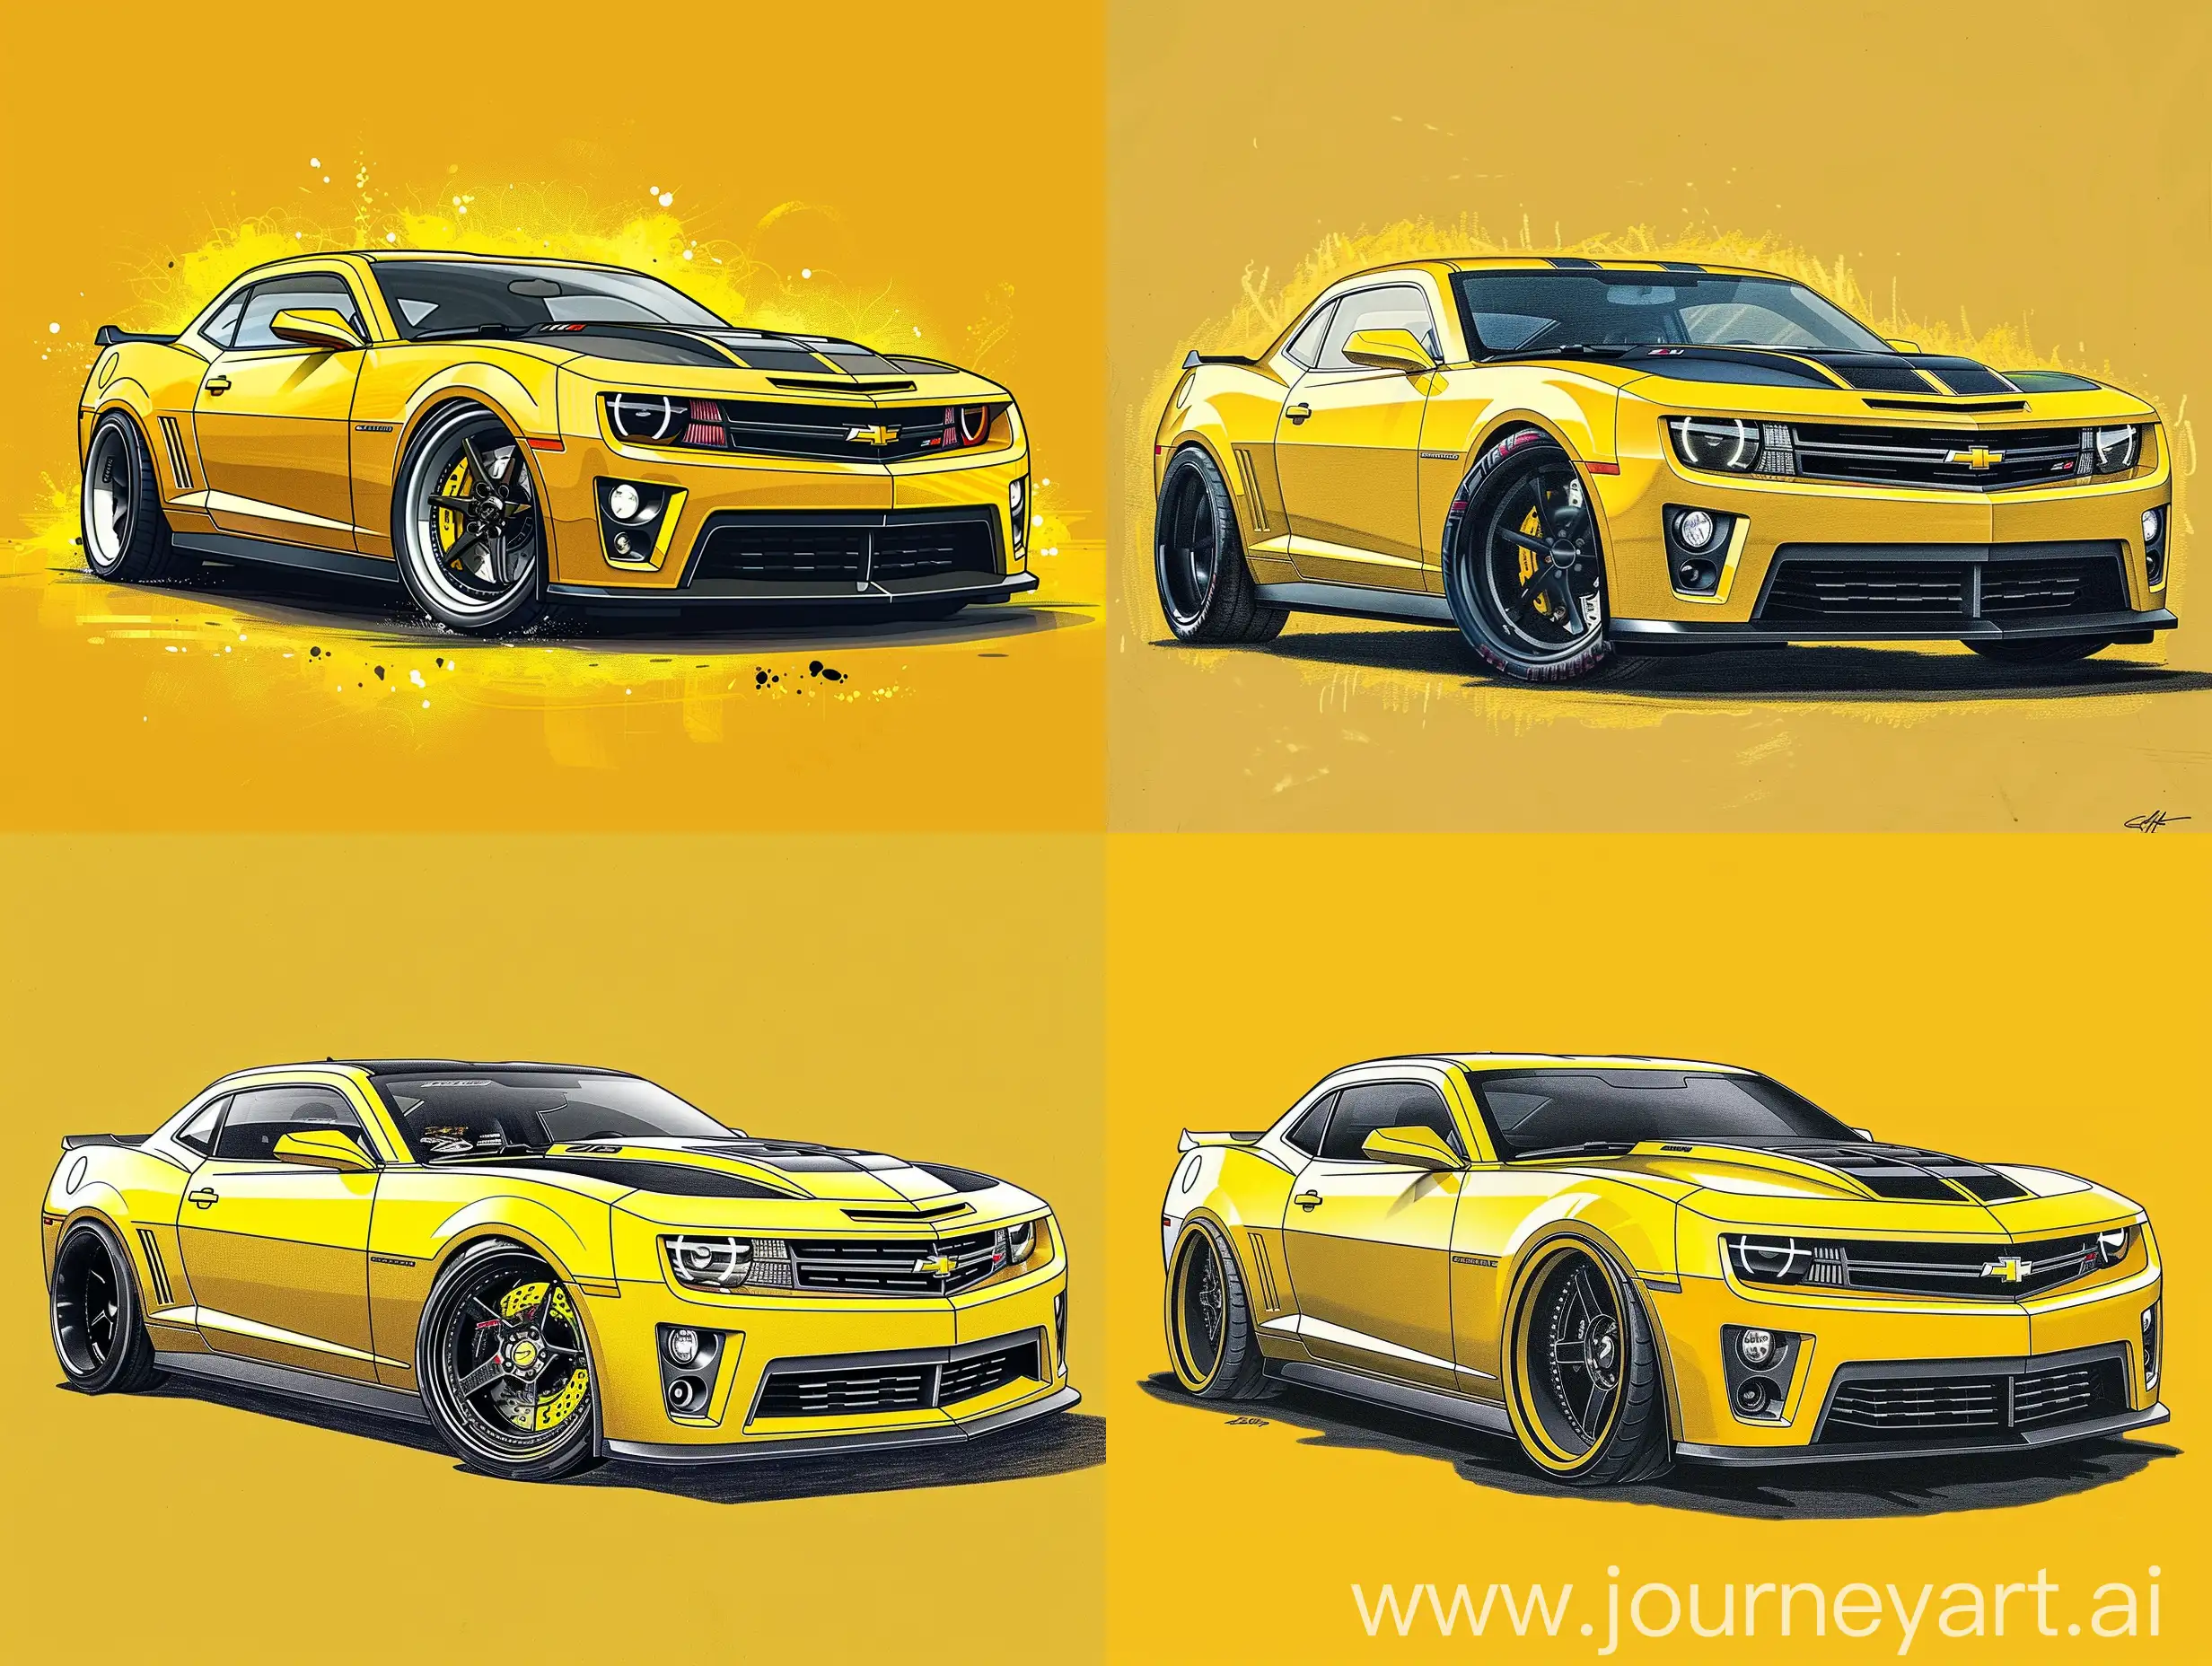 2011 Chevrolet Camaro ZL1 in yellow with black racing stripes, widebody kit, illustration drawing, with yellow background